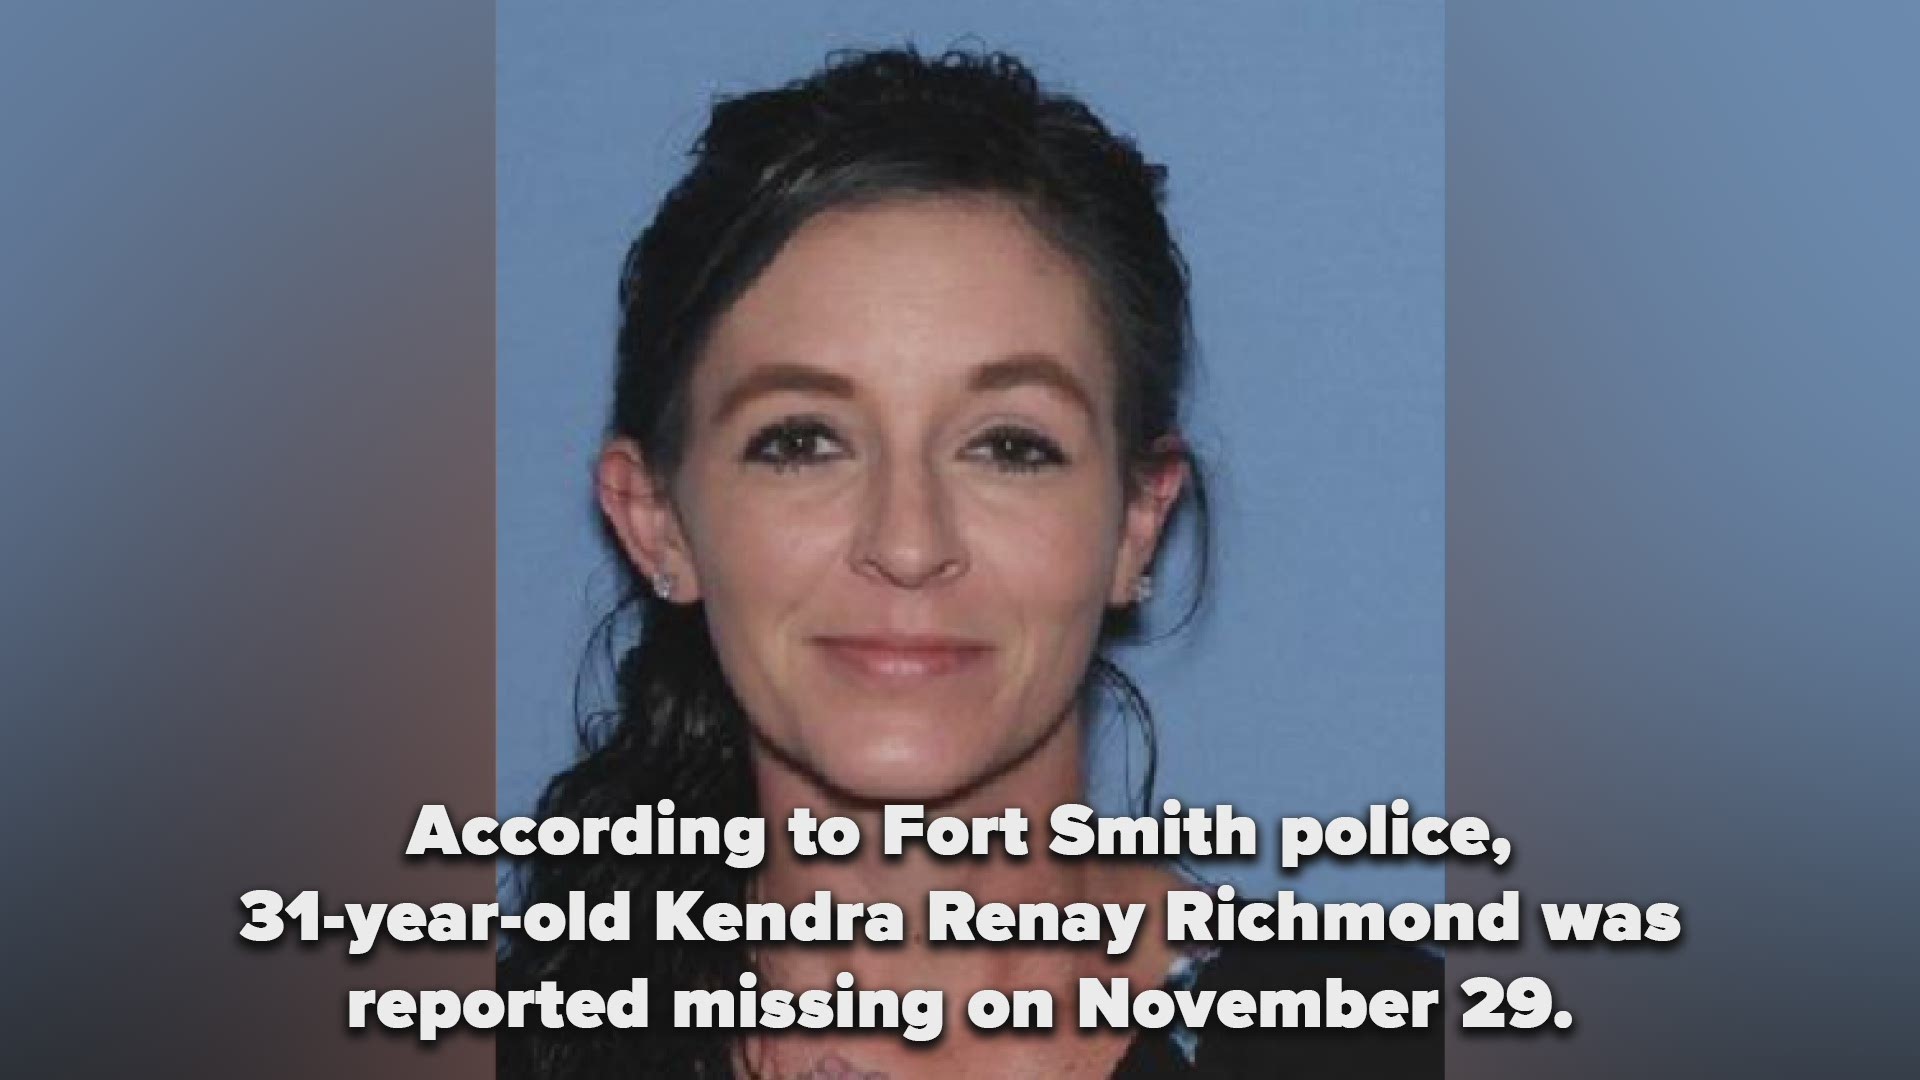 According to Fort Smith police, 31-year-old Kendra Renay Richmond was reported missing on November 29.